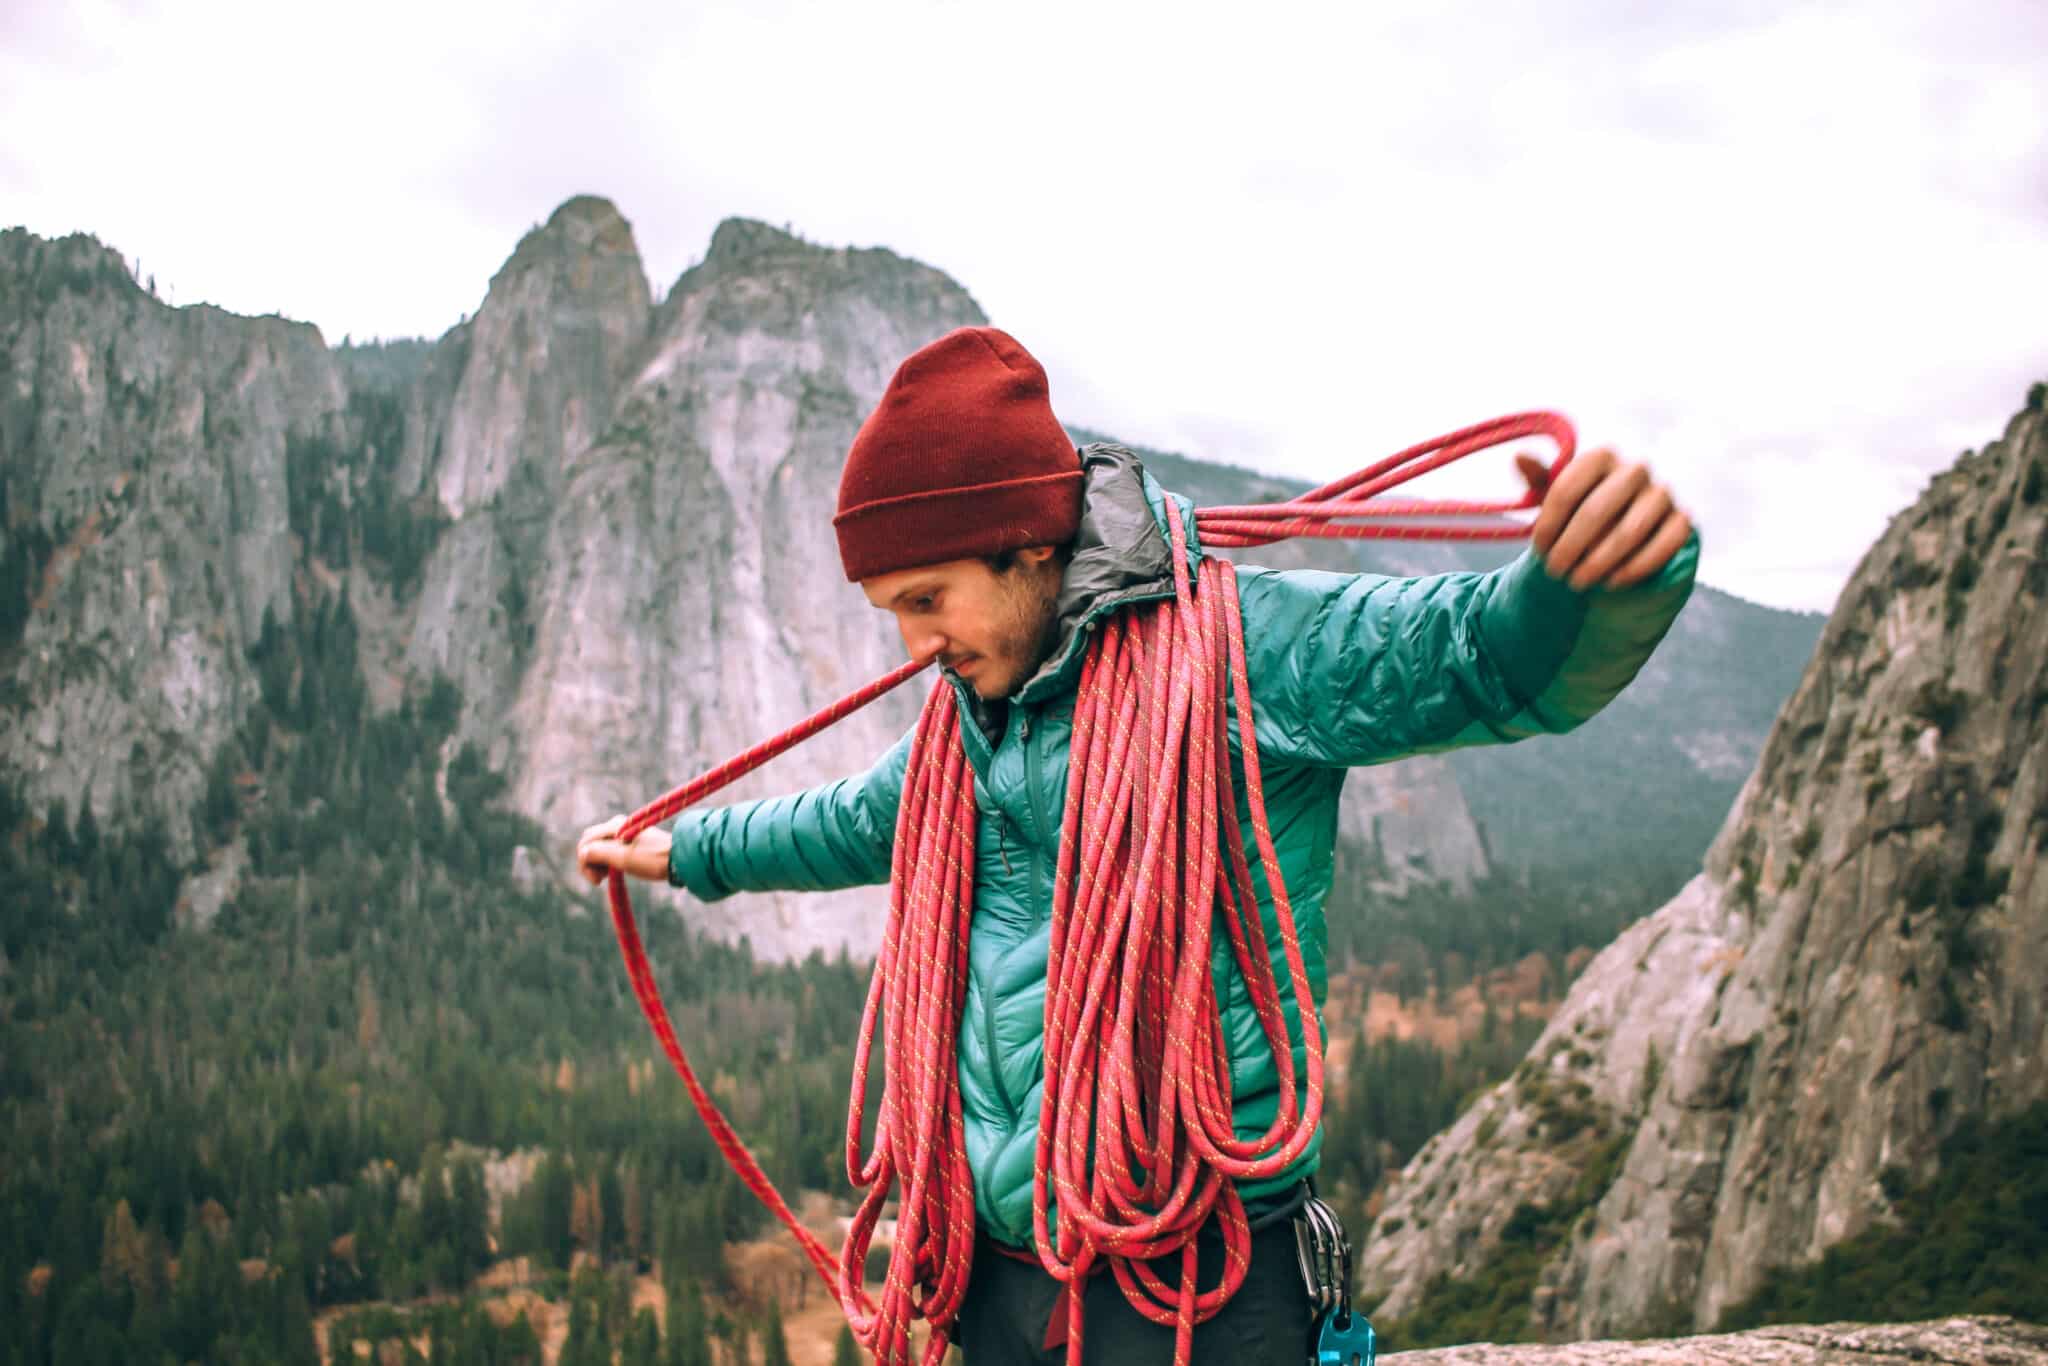 Man coiling rope in Yosemite National Park rock climbing